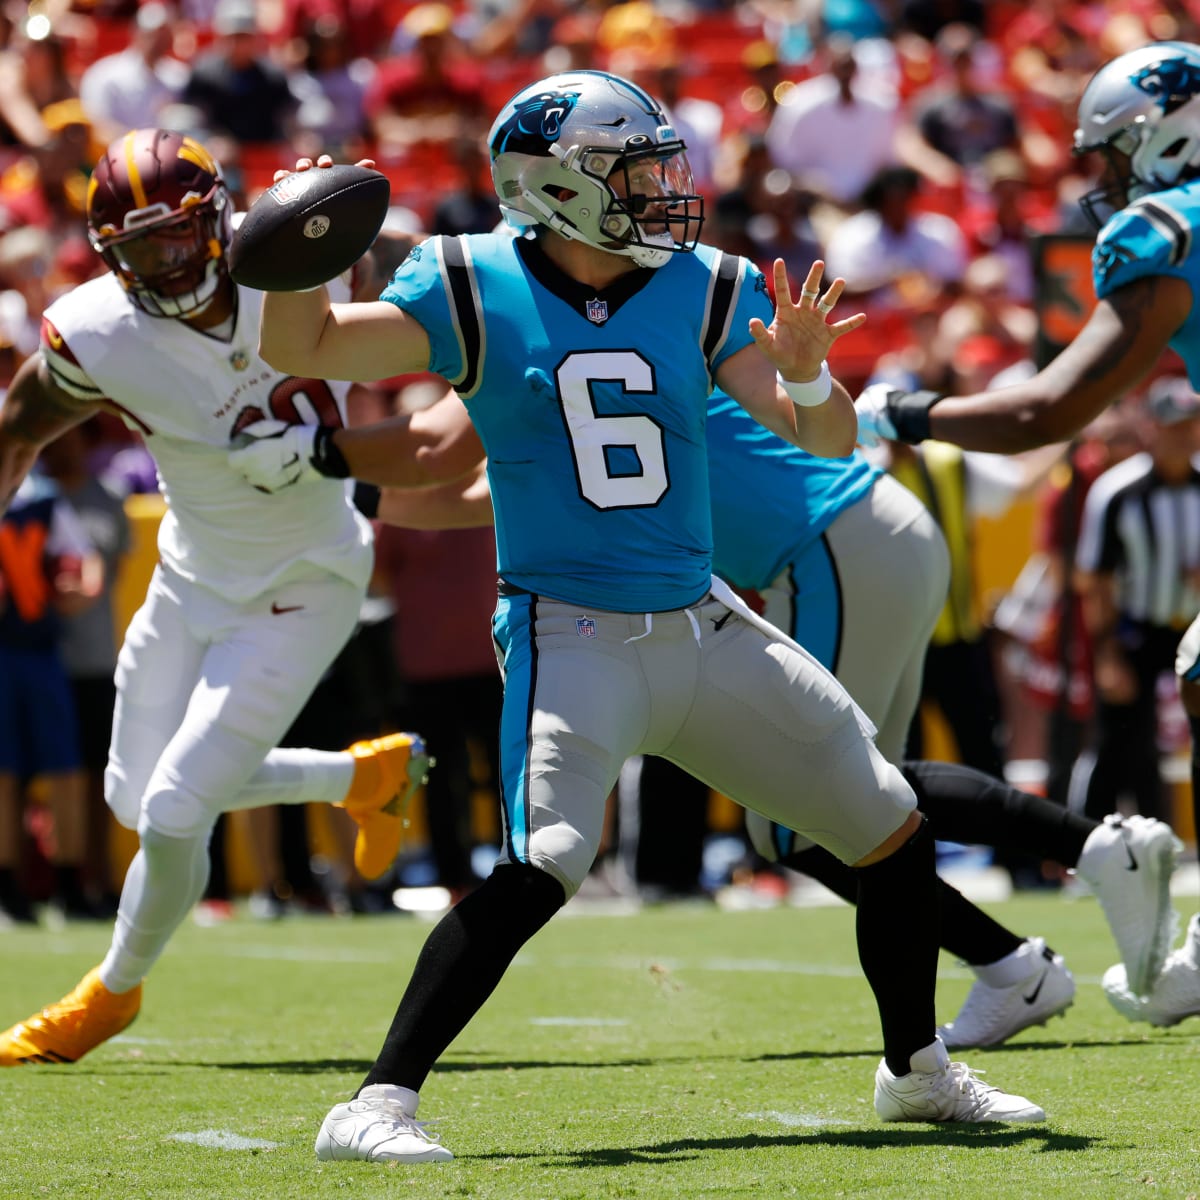 Panthers vs. Browns live stream: TV channel, how to watch NFL this